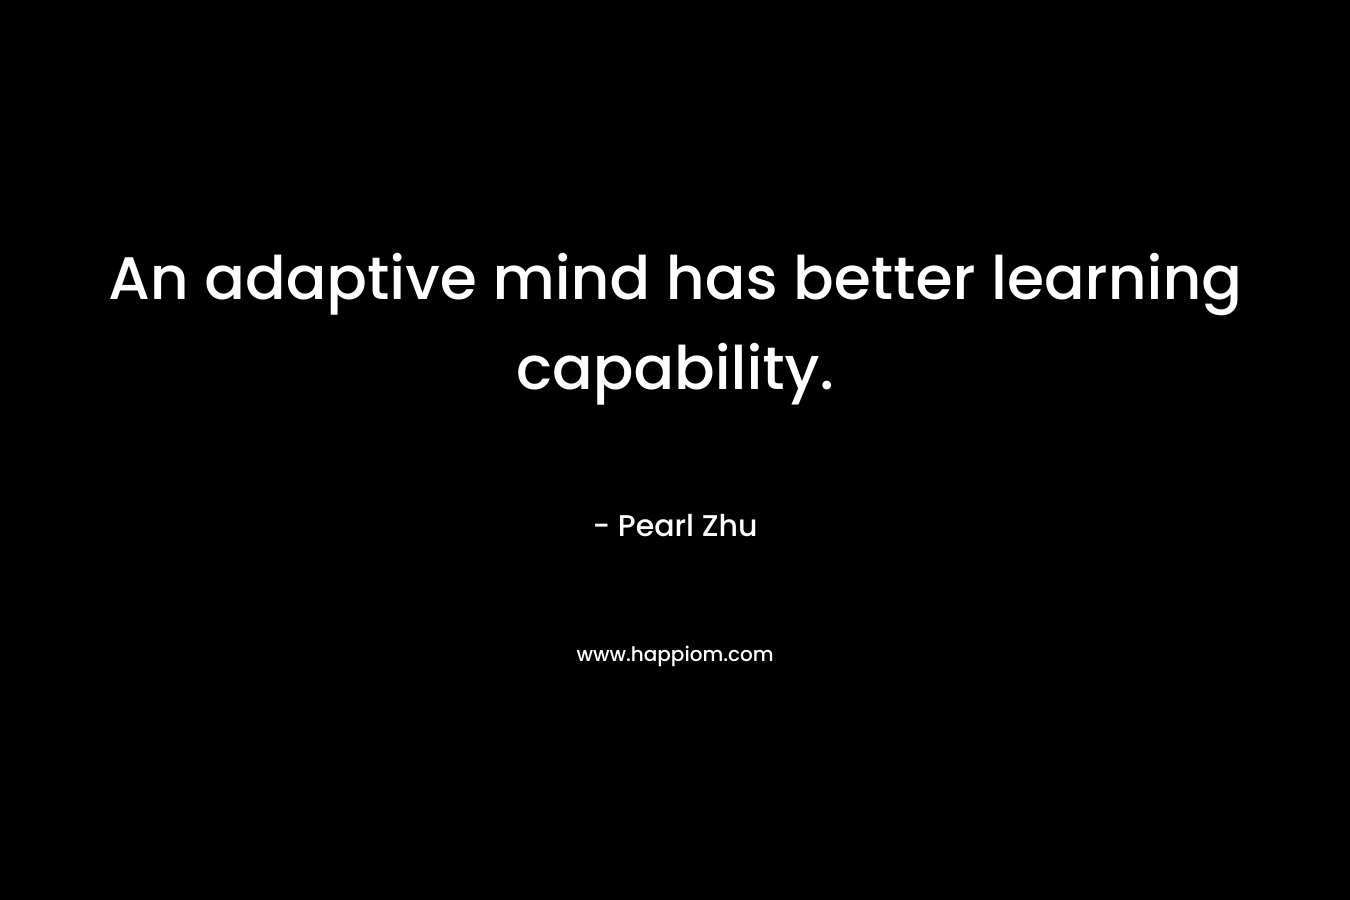 An adaptive mind has better learning capability.